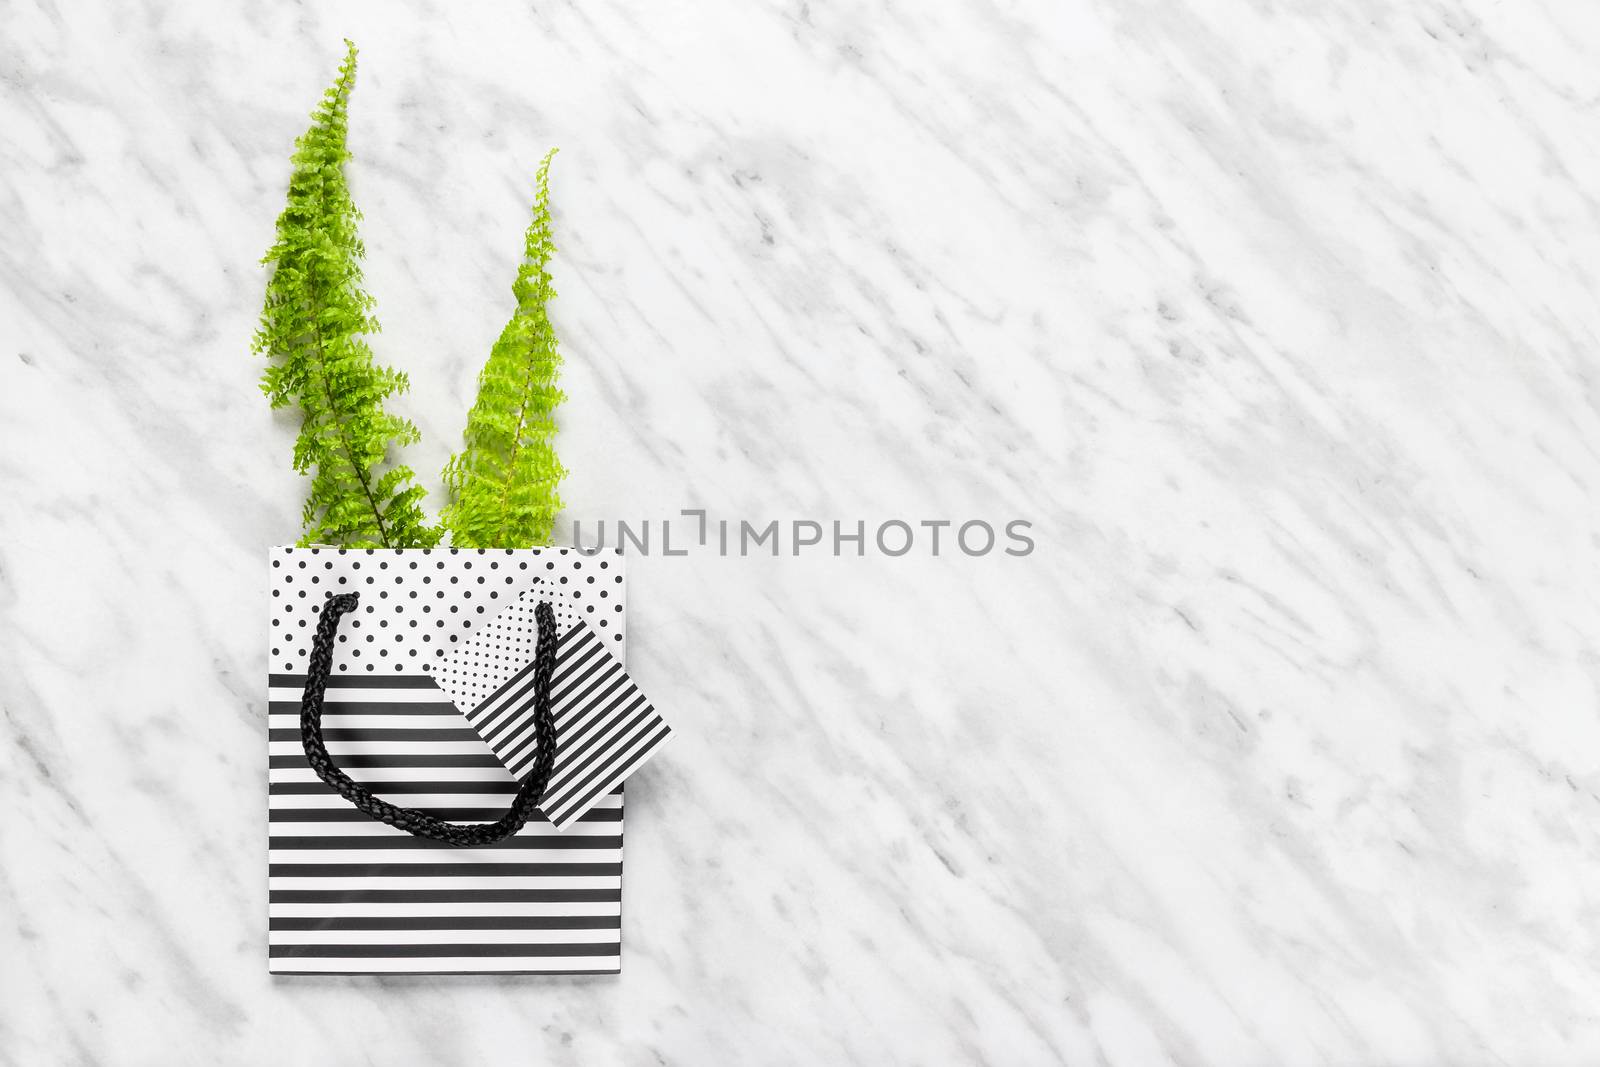 Green fern in a black and white striped gift bag, on marble background.